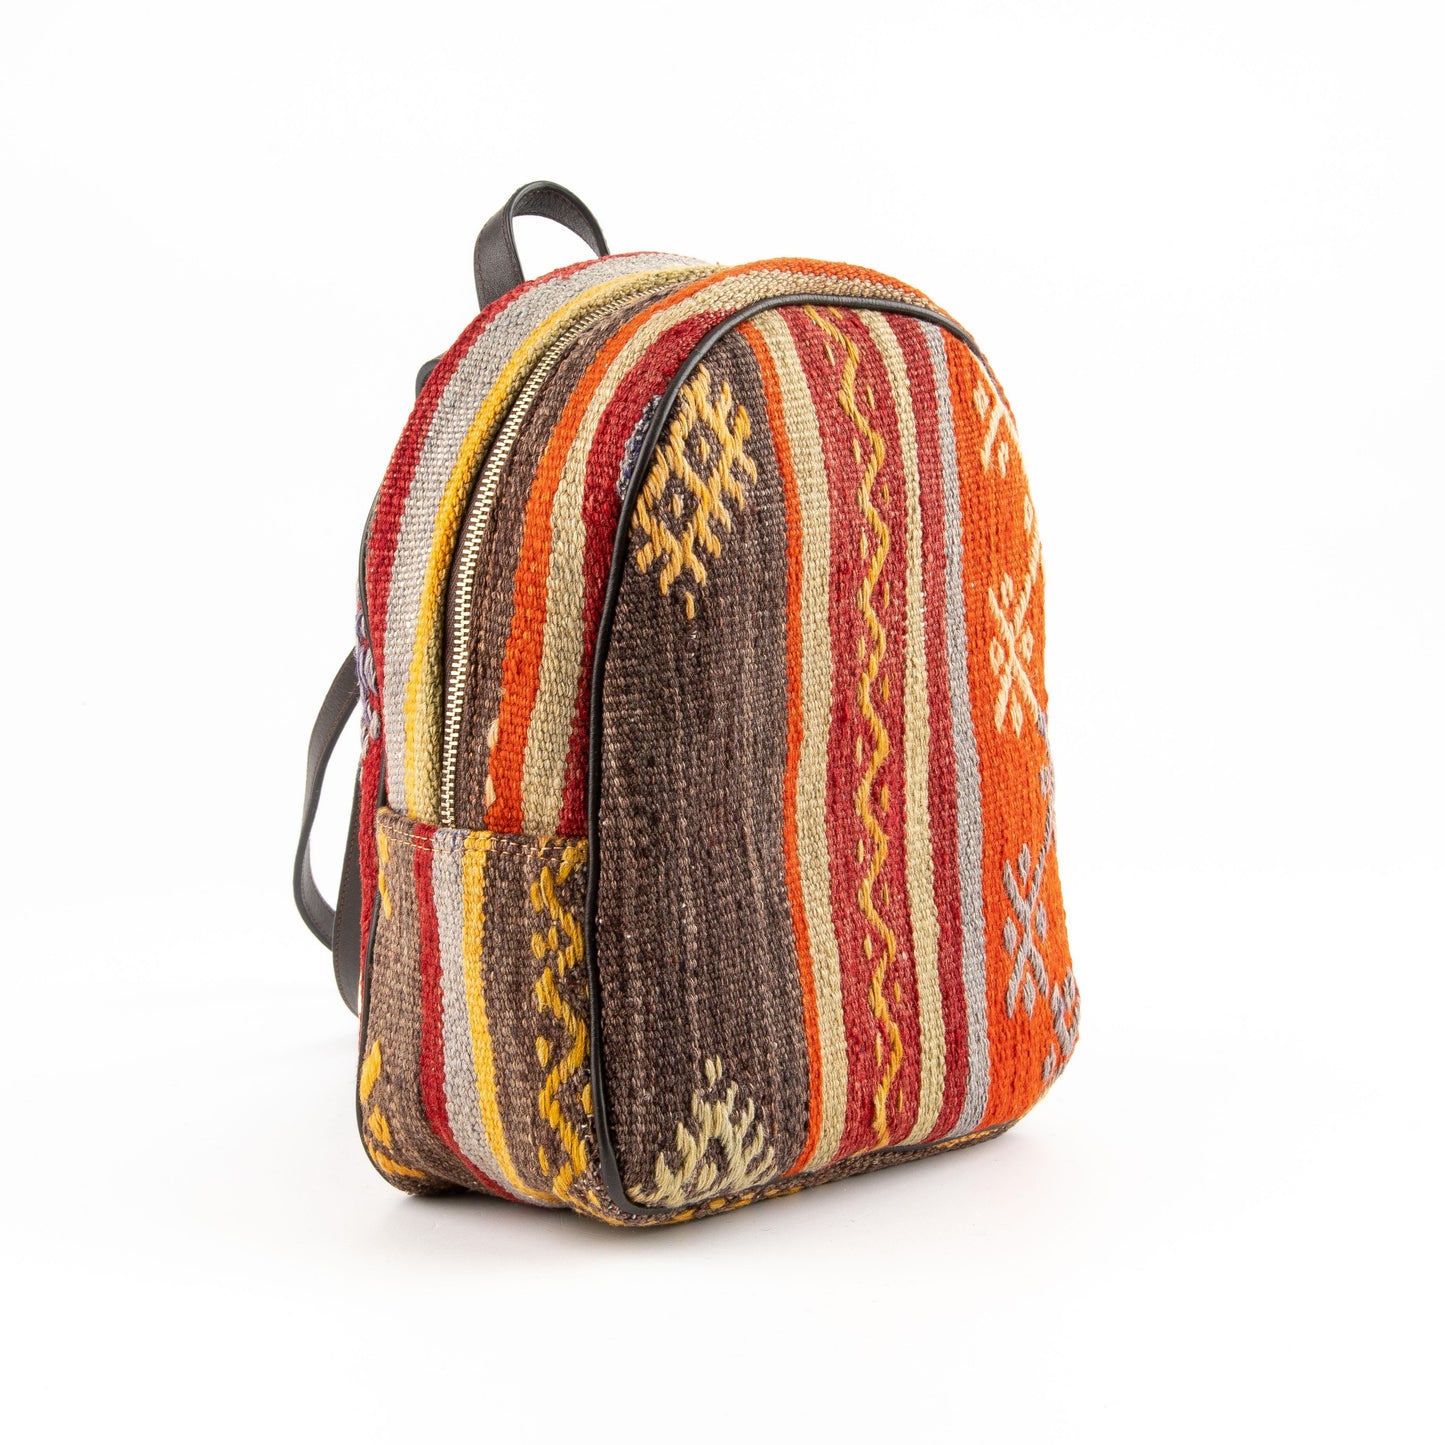 Handmade Kilim Real Leather Unique Backpack Bag Leather Strap Zipper Closure Lined